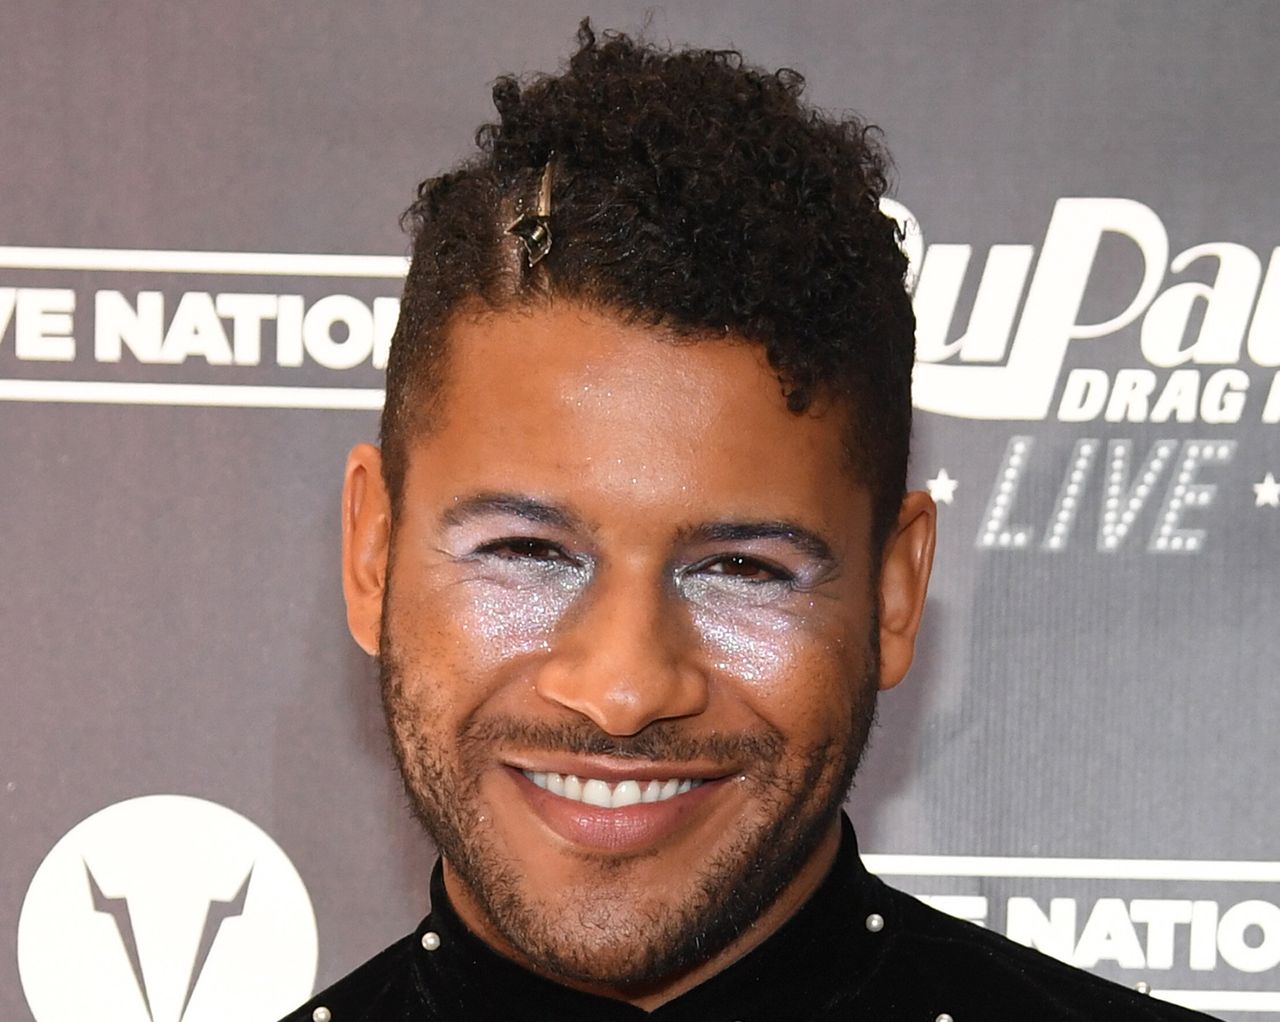 Jeffrey Bowyer-Chapman has deleted his social media accounts due to fan pile-ons